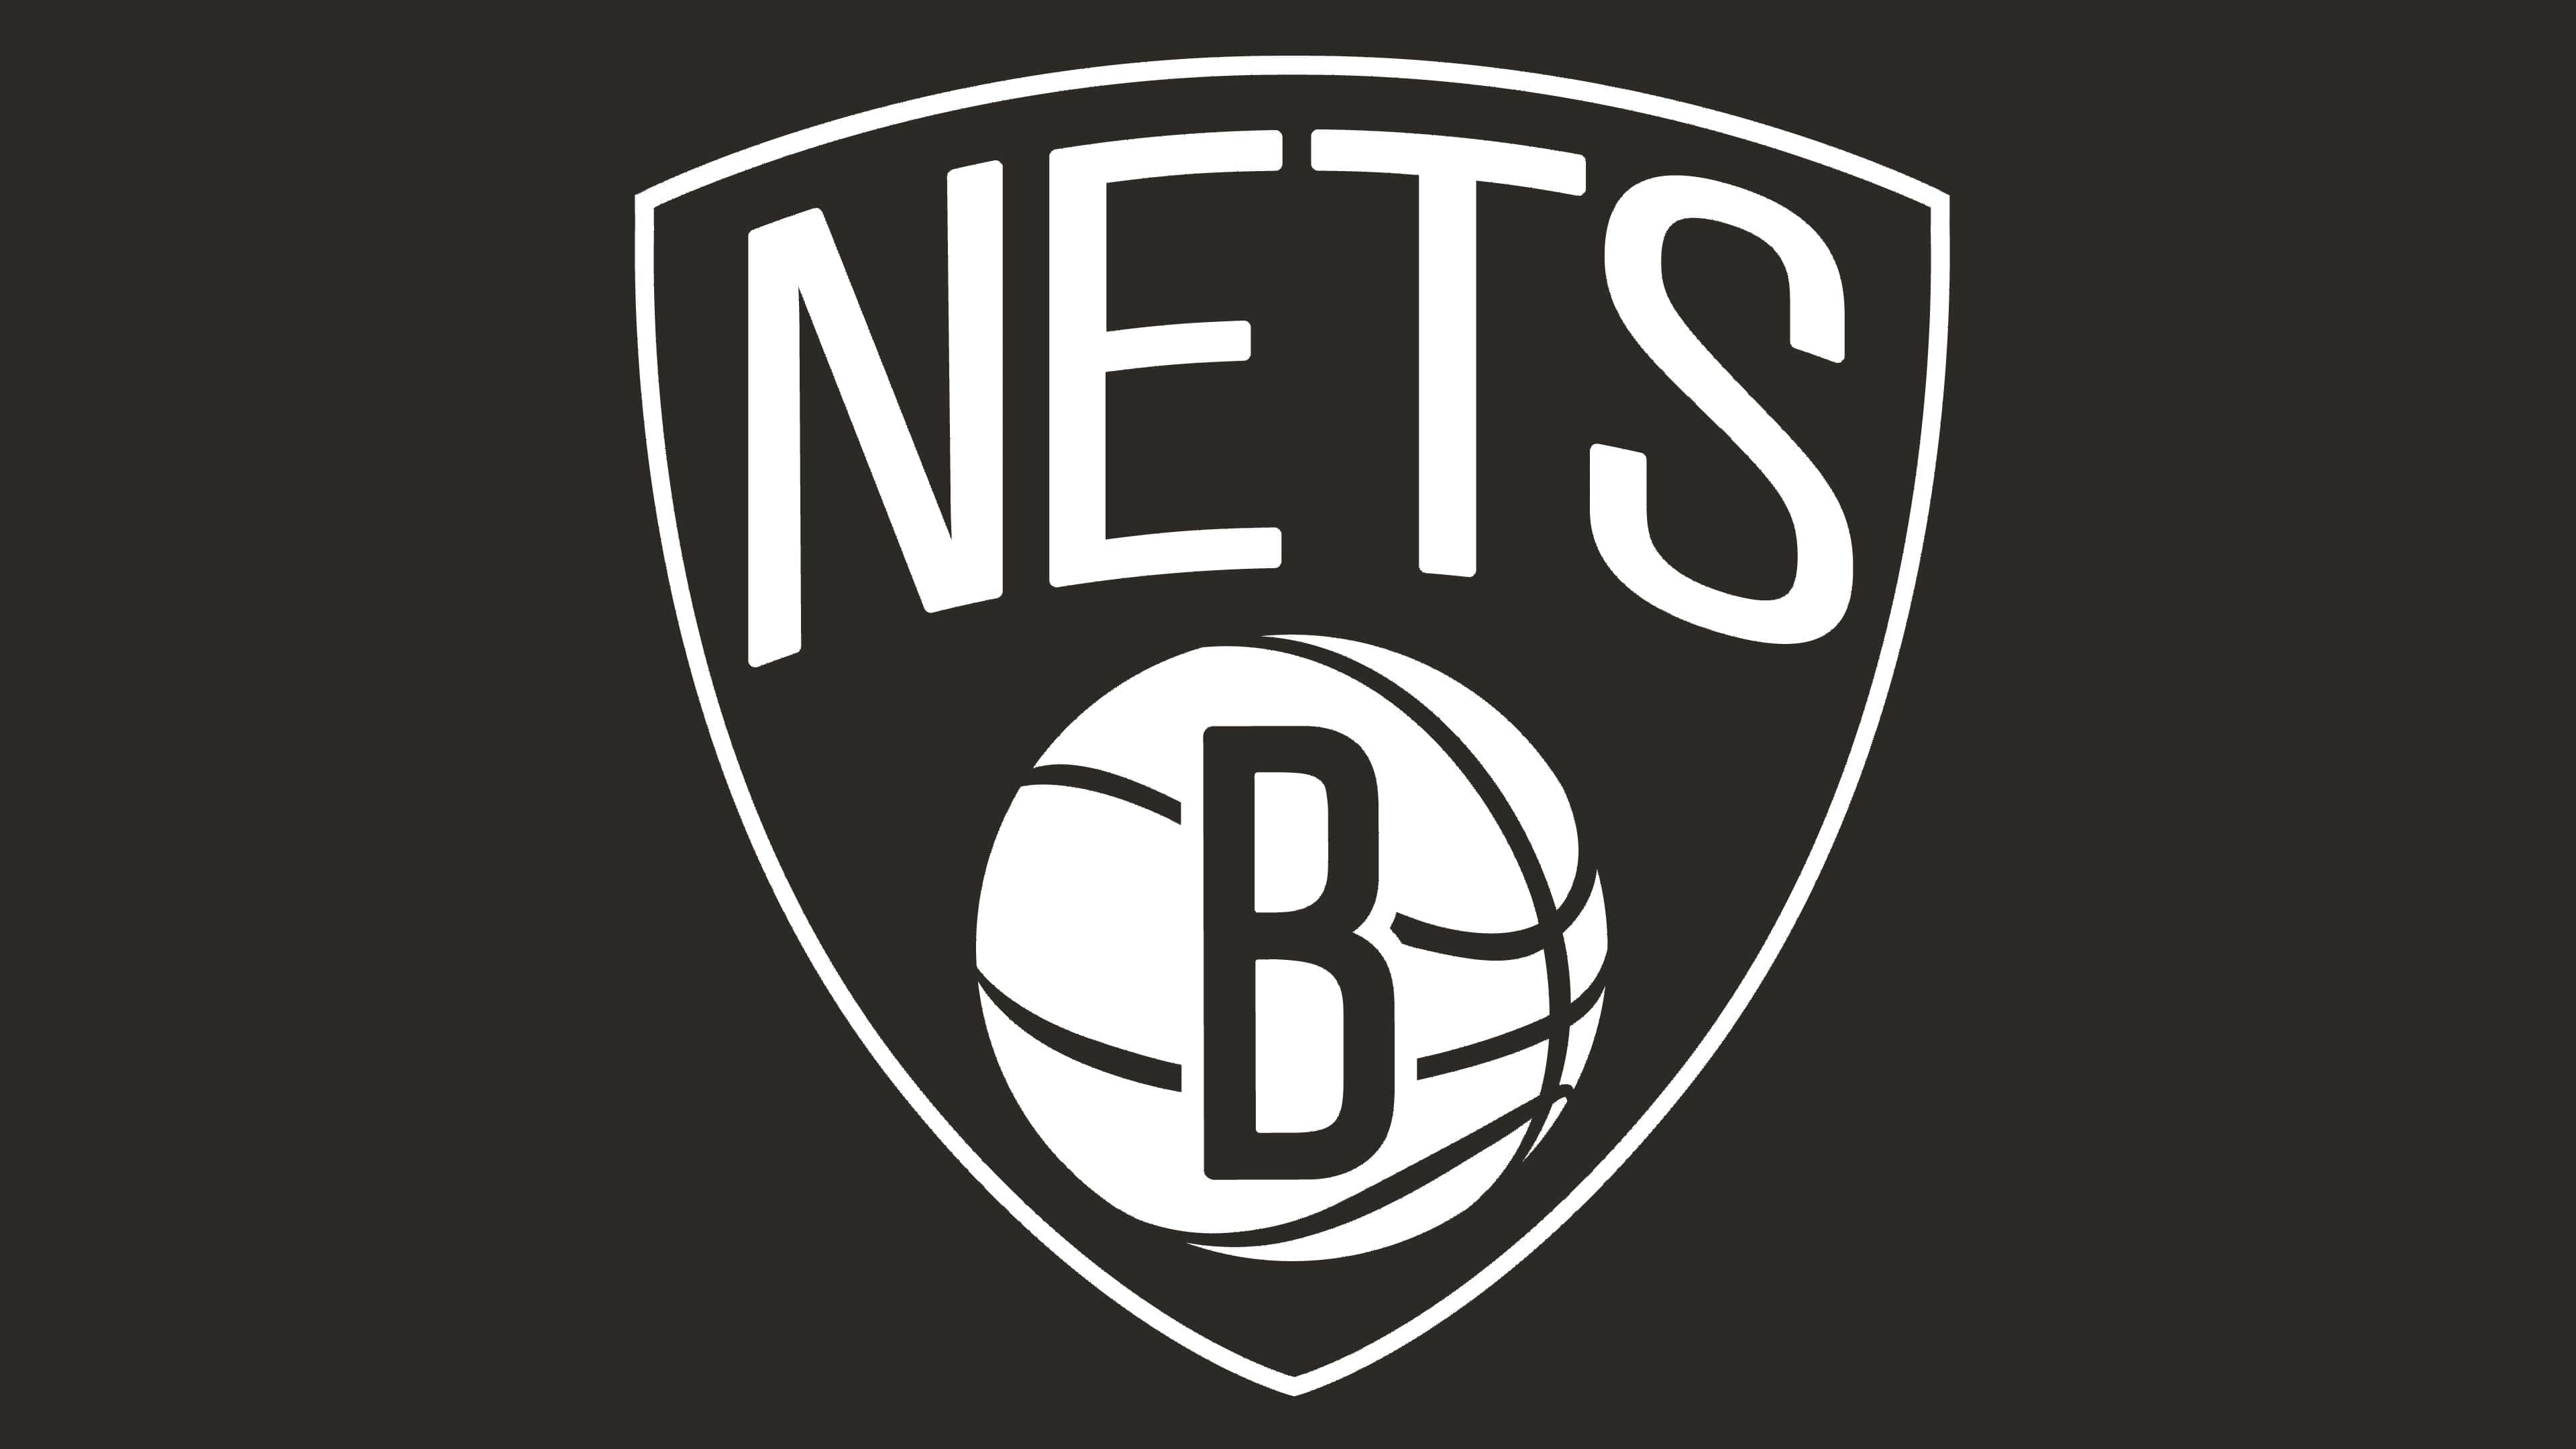 Brooklyn Nets Logo The Most Famous Brands And Company Logos In The World